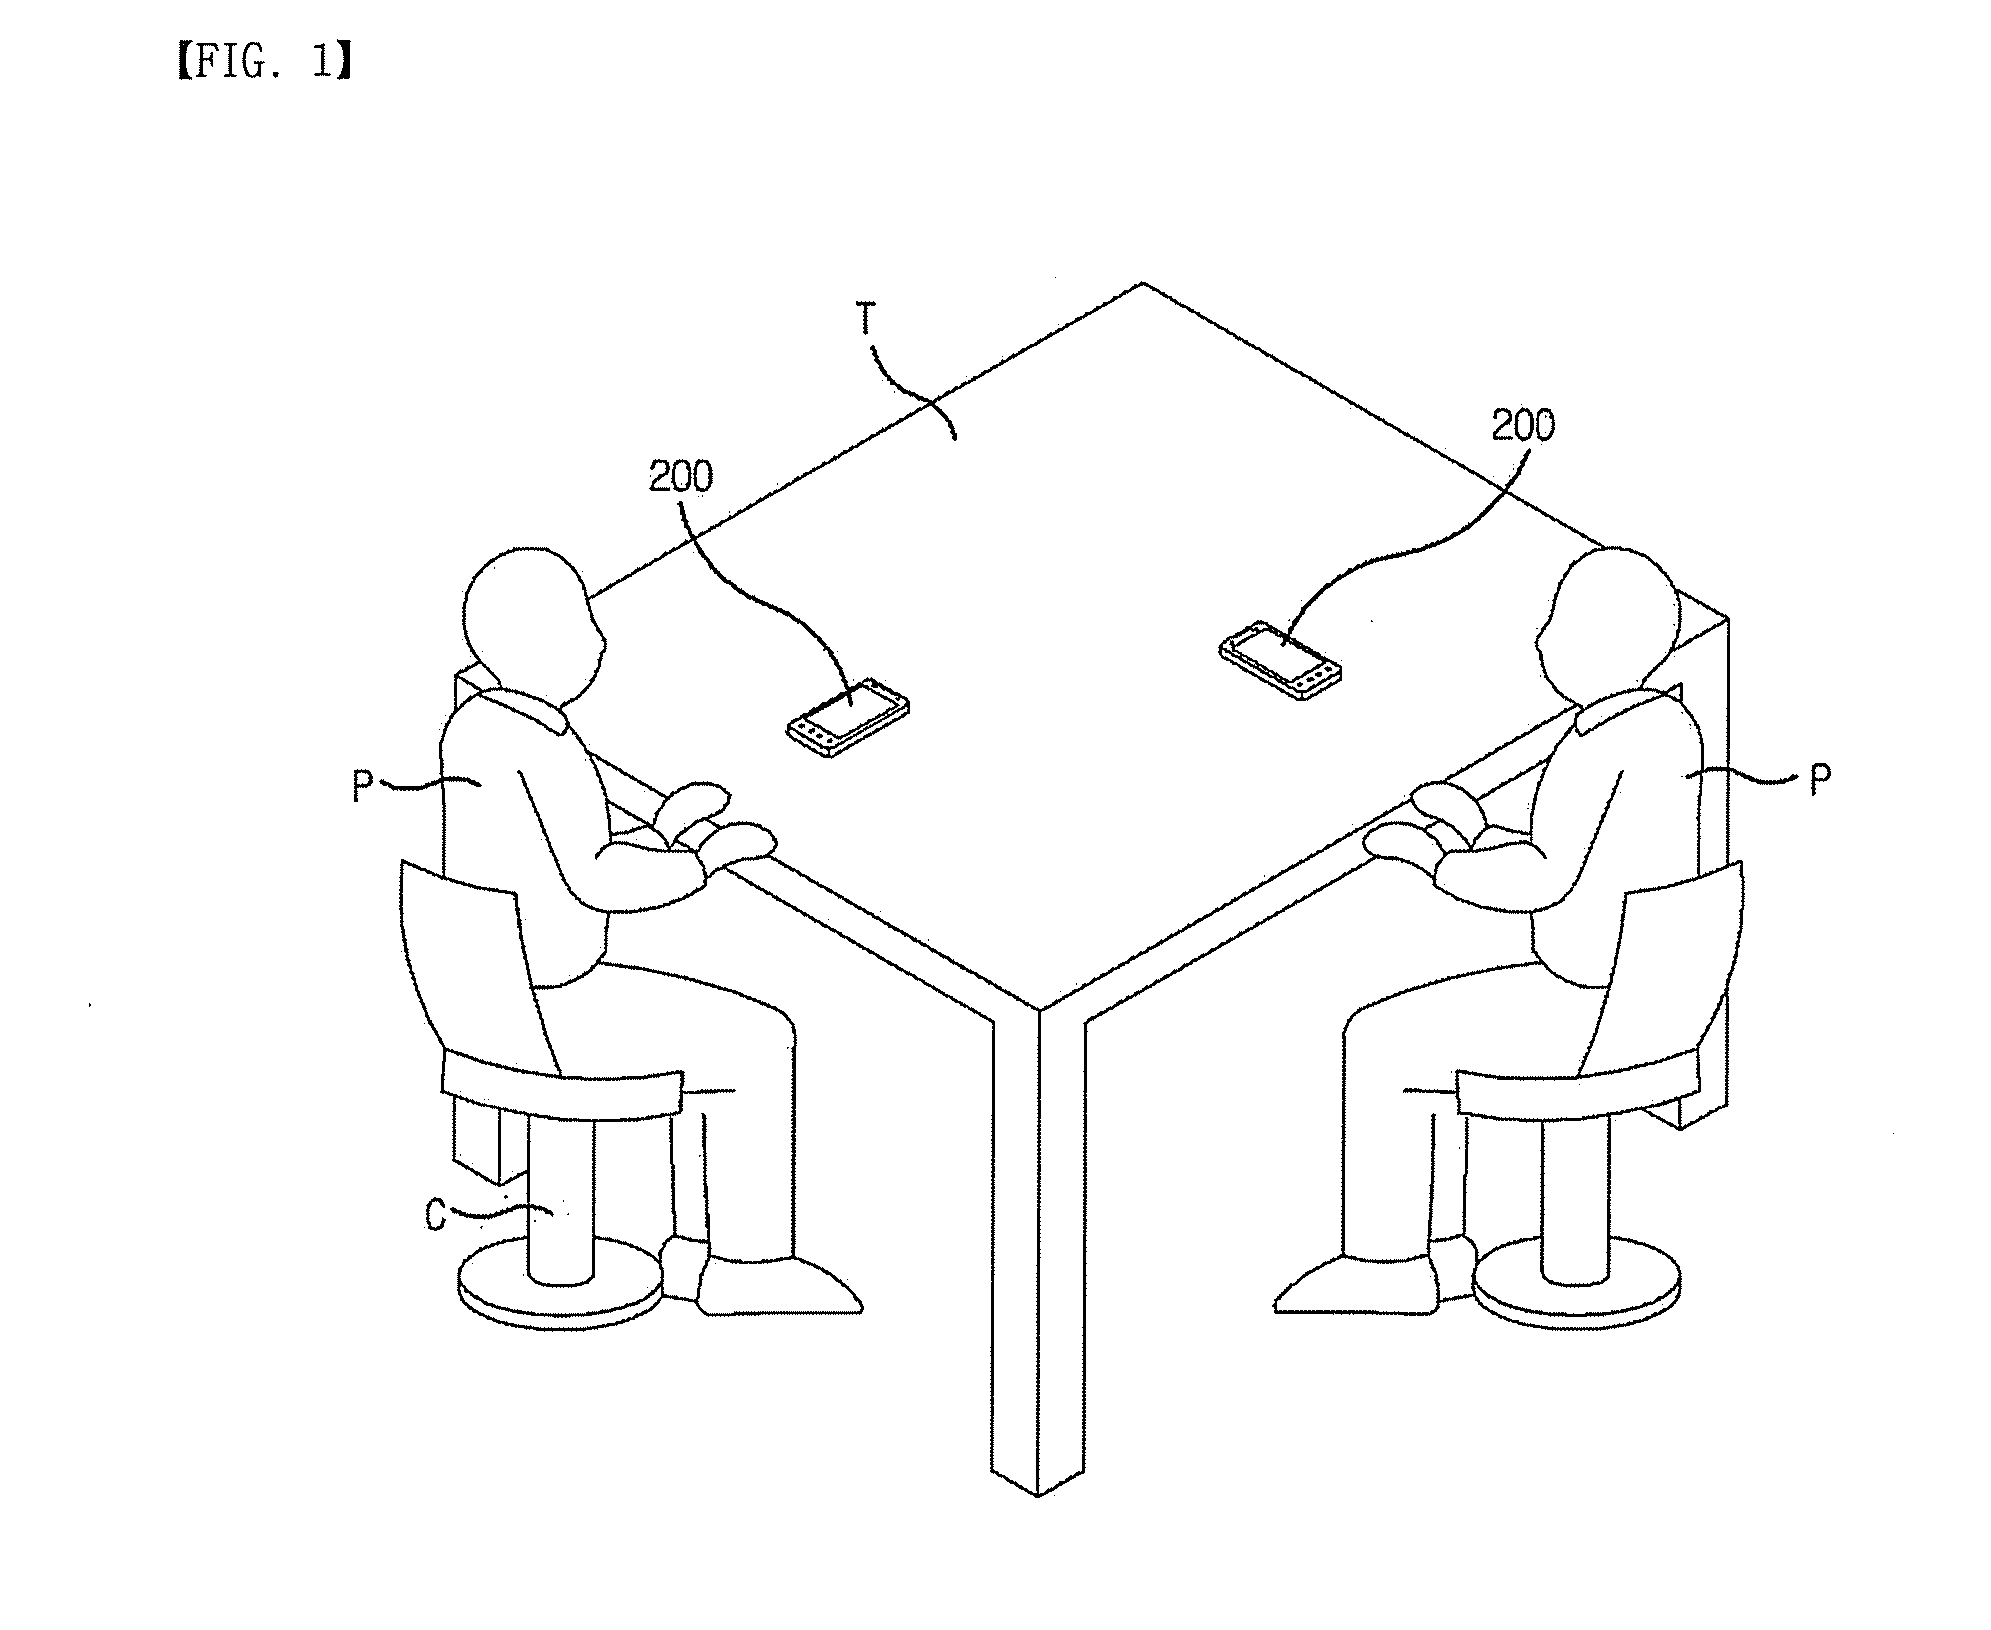 Wireless power transmission system, furniture having wireless charging function used therein, and wireless power transmssion apparatus used therein